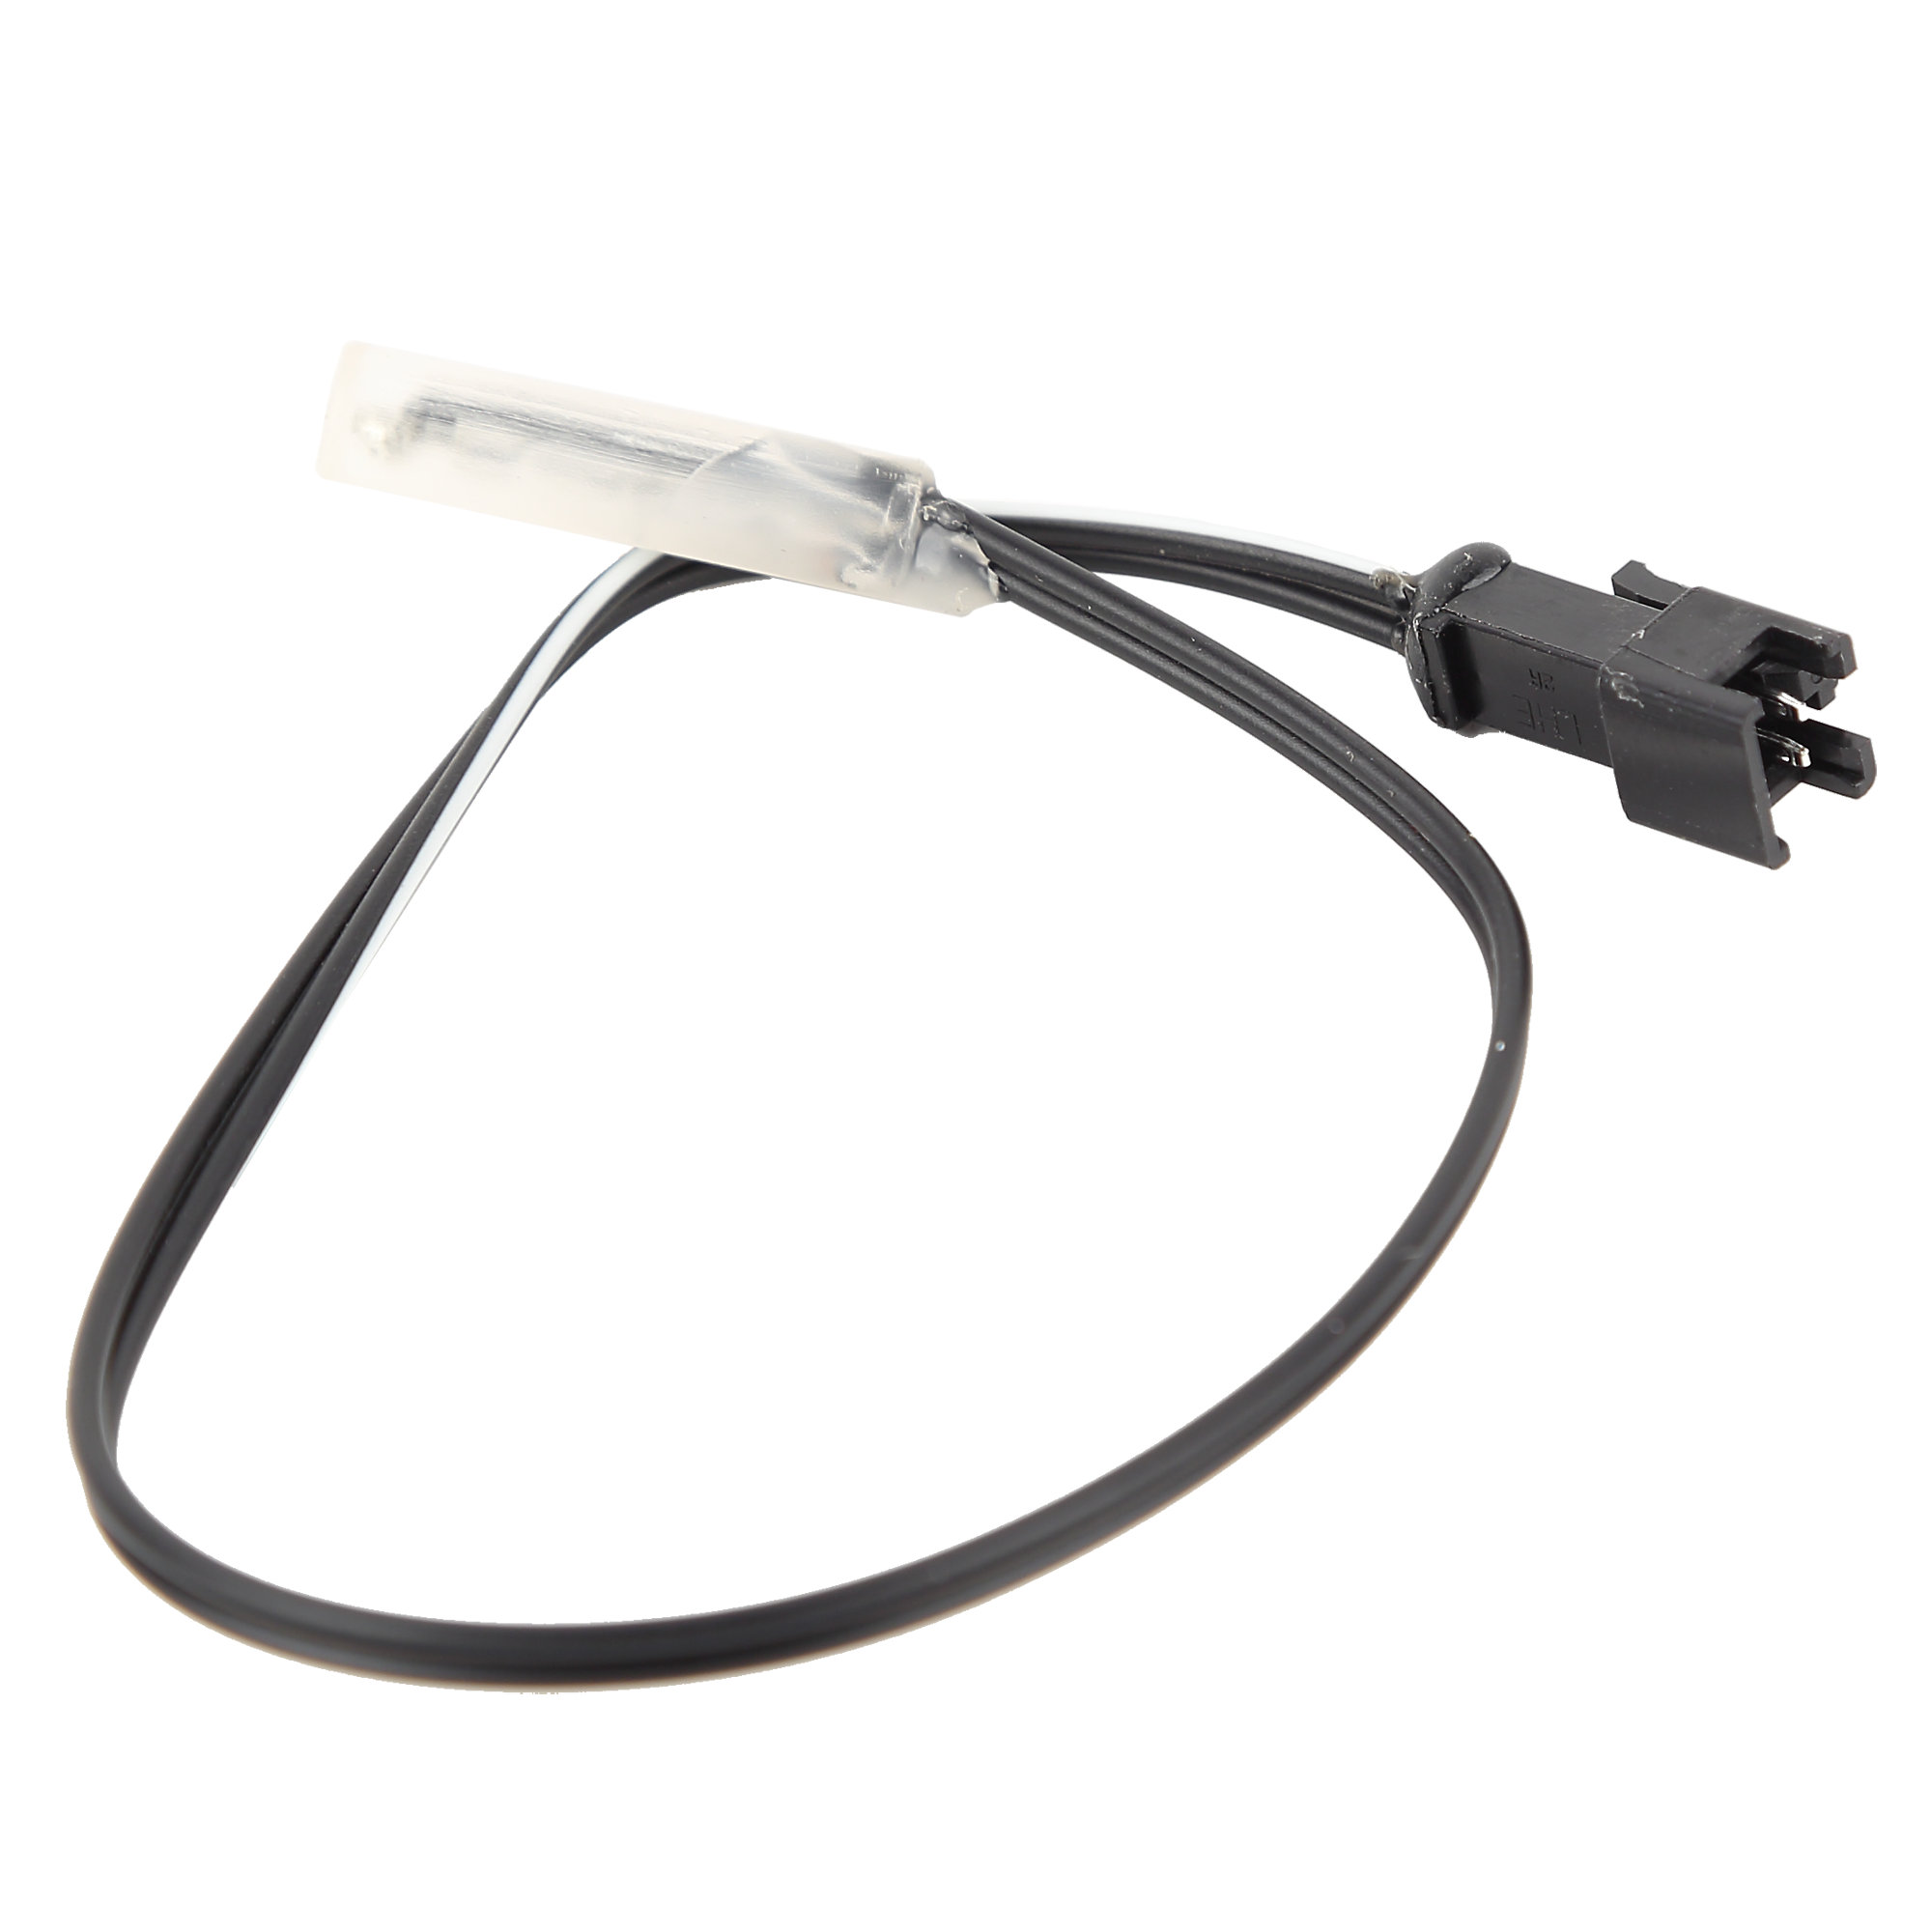 Speed Sensor Cable Assembly for Schwinn AD6